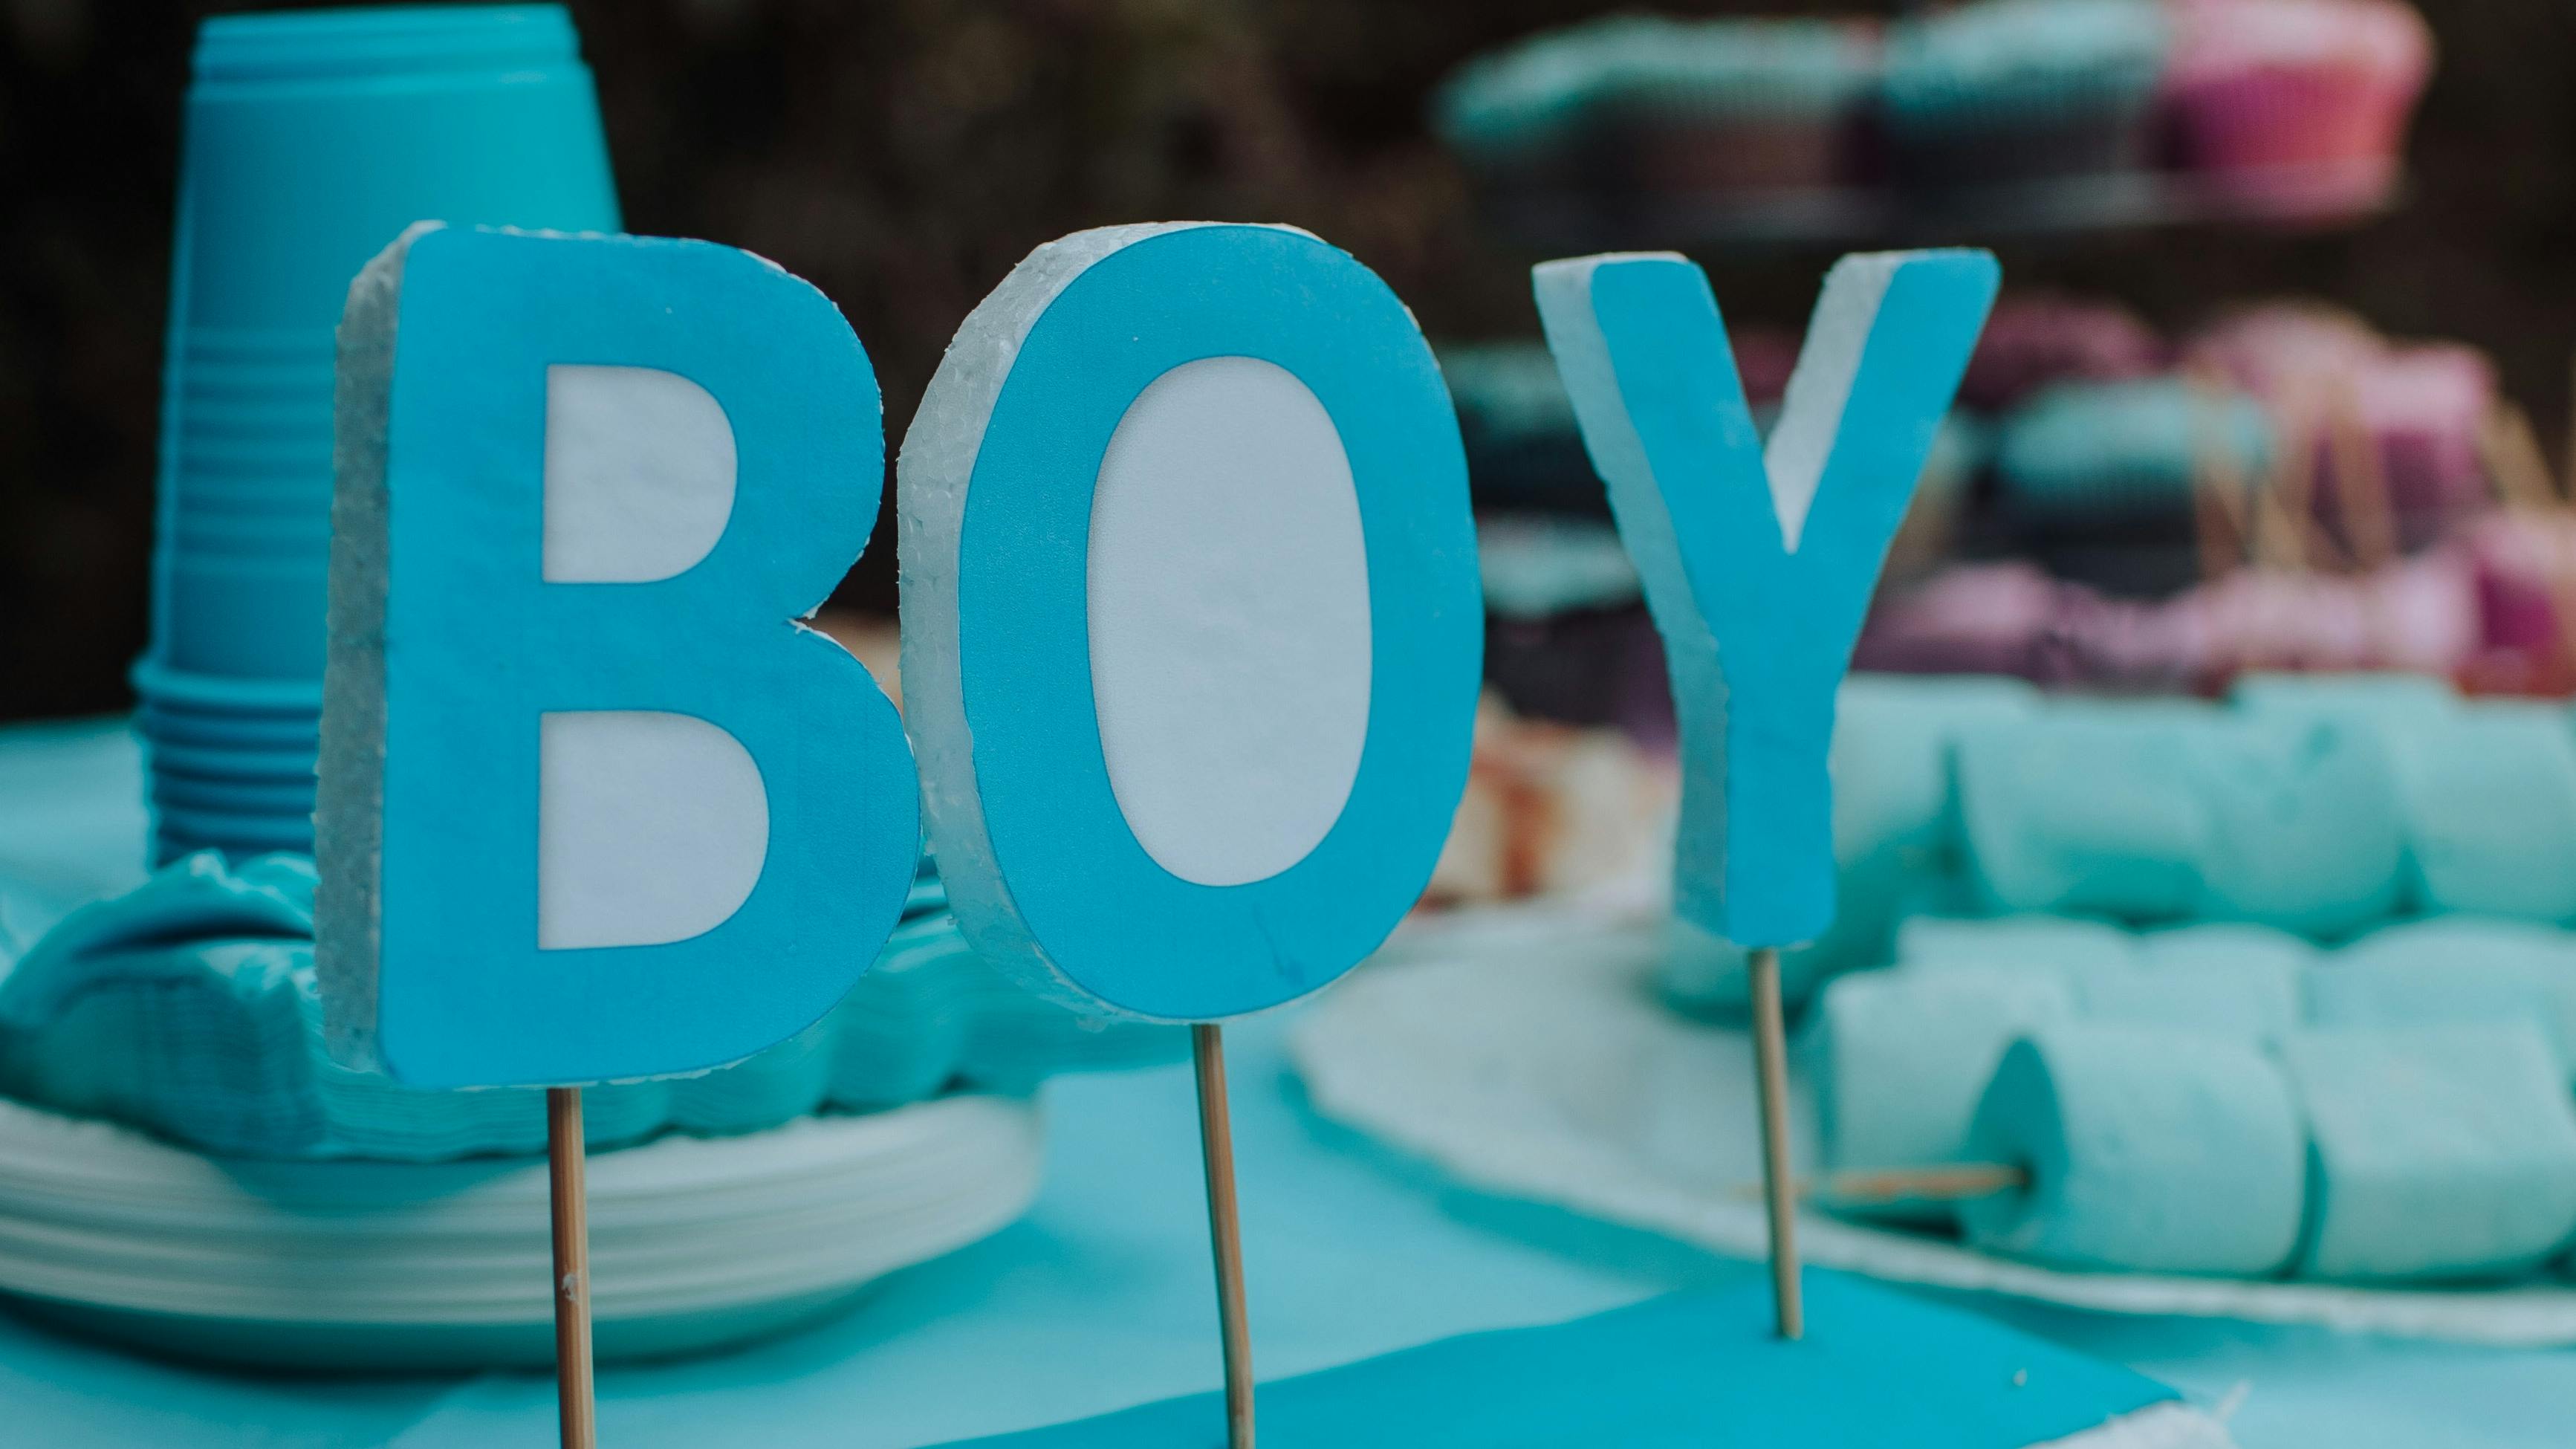 A party table that has blue cupcakes and cups and a sign that says "BOY".